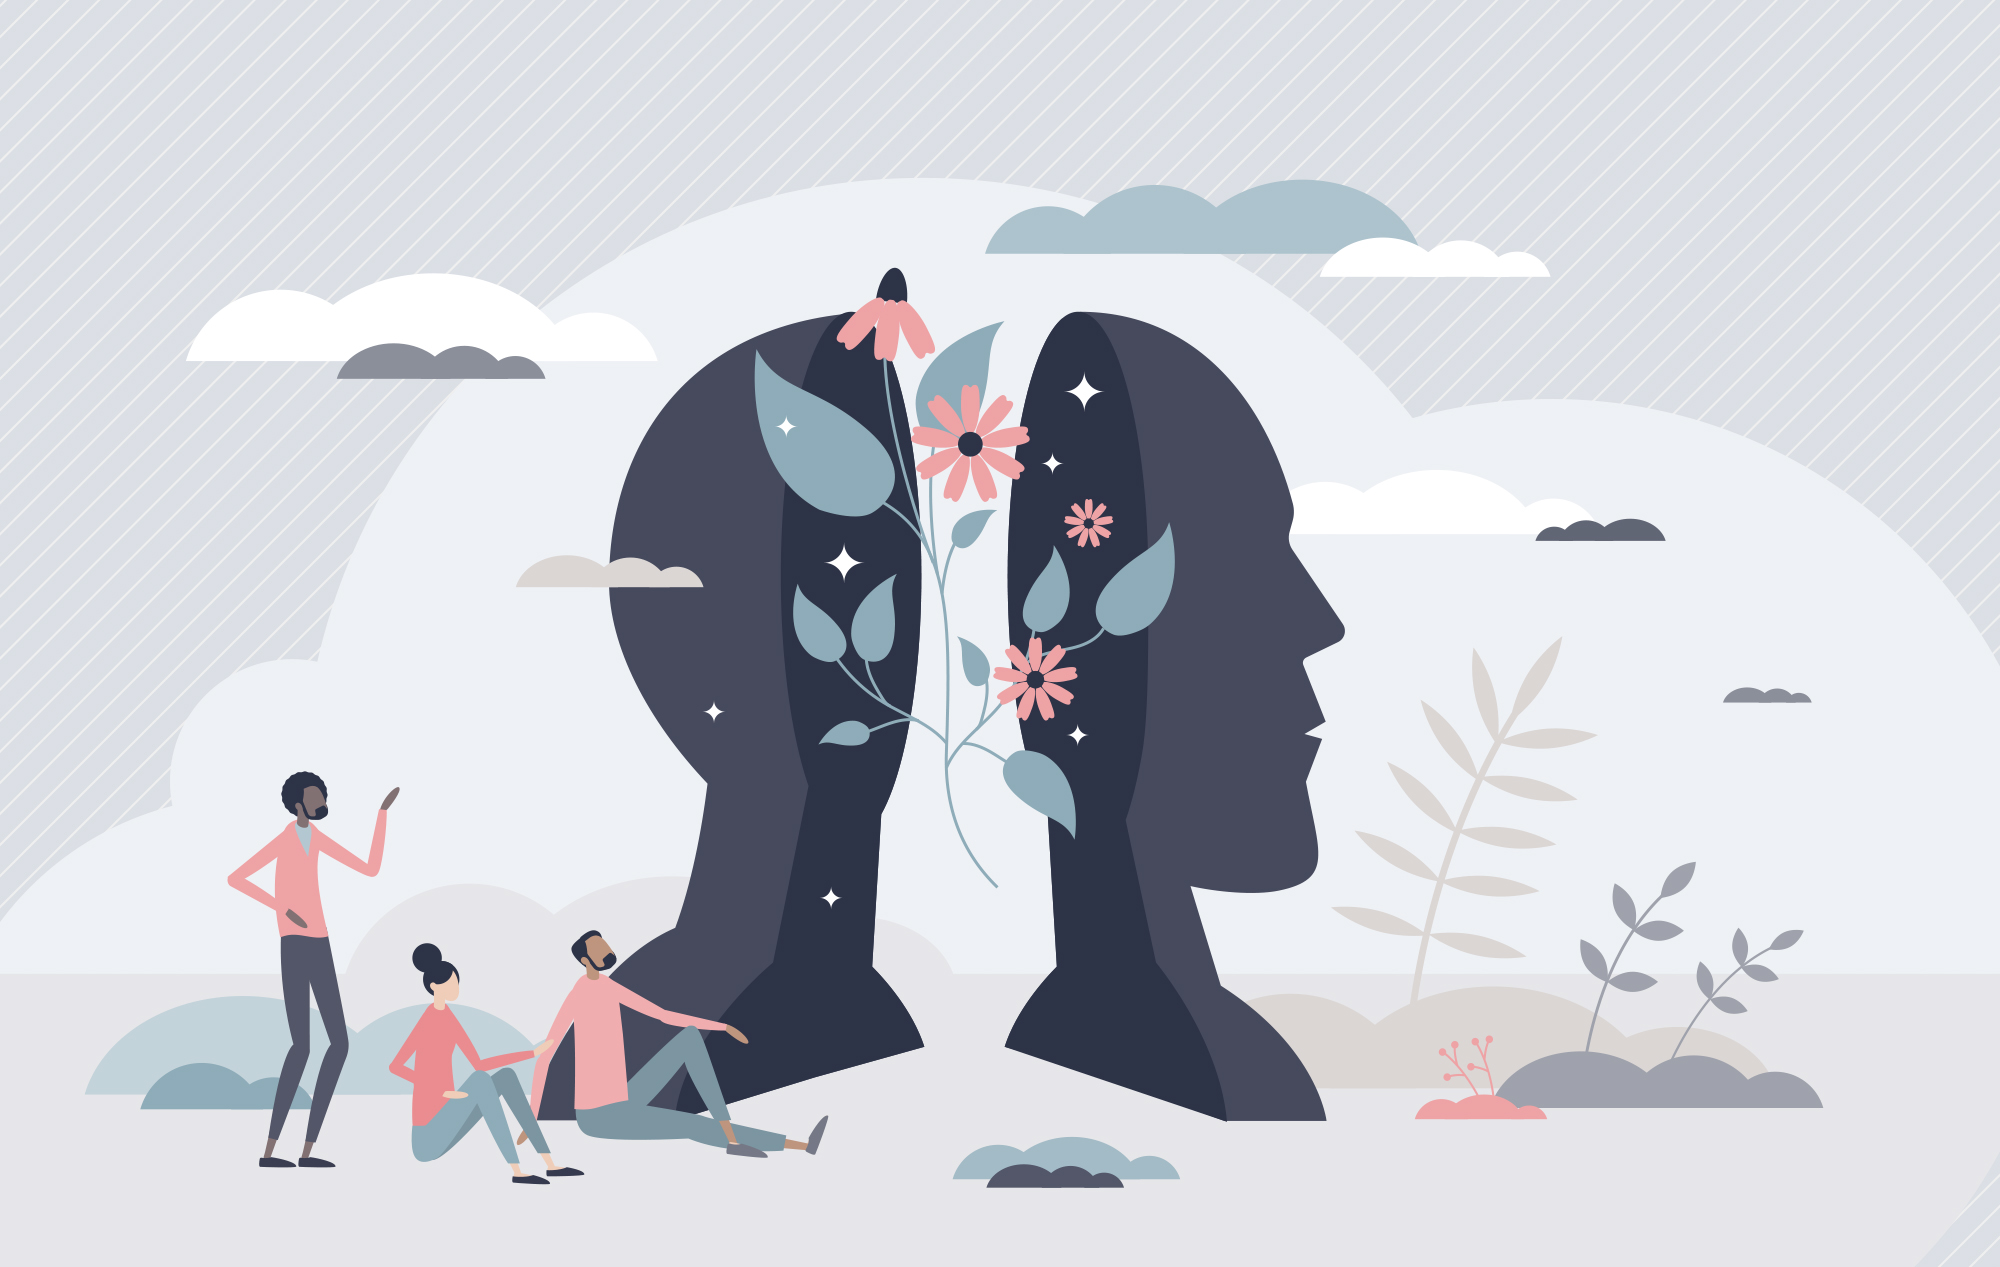 Illustration of an open mind with flowers and leaves coming out of it. People onlook and admire.